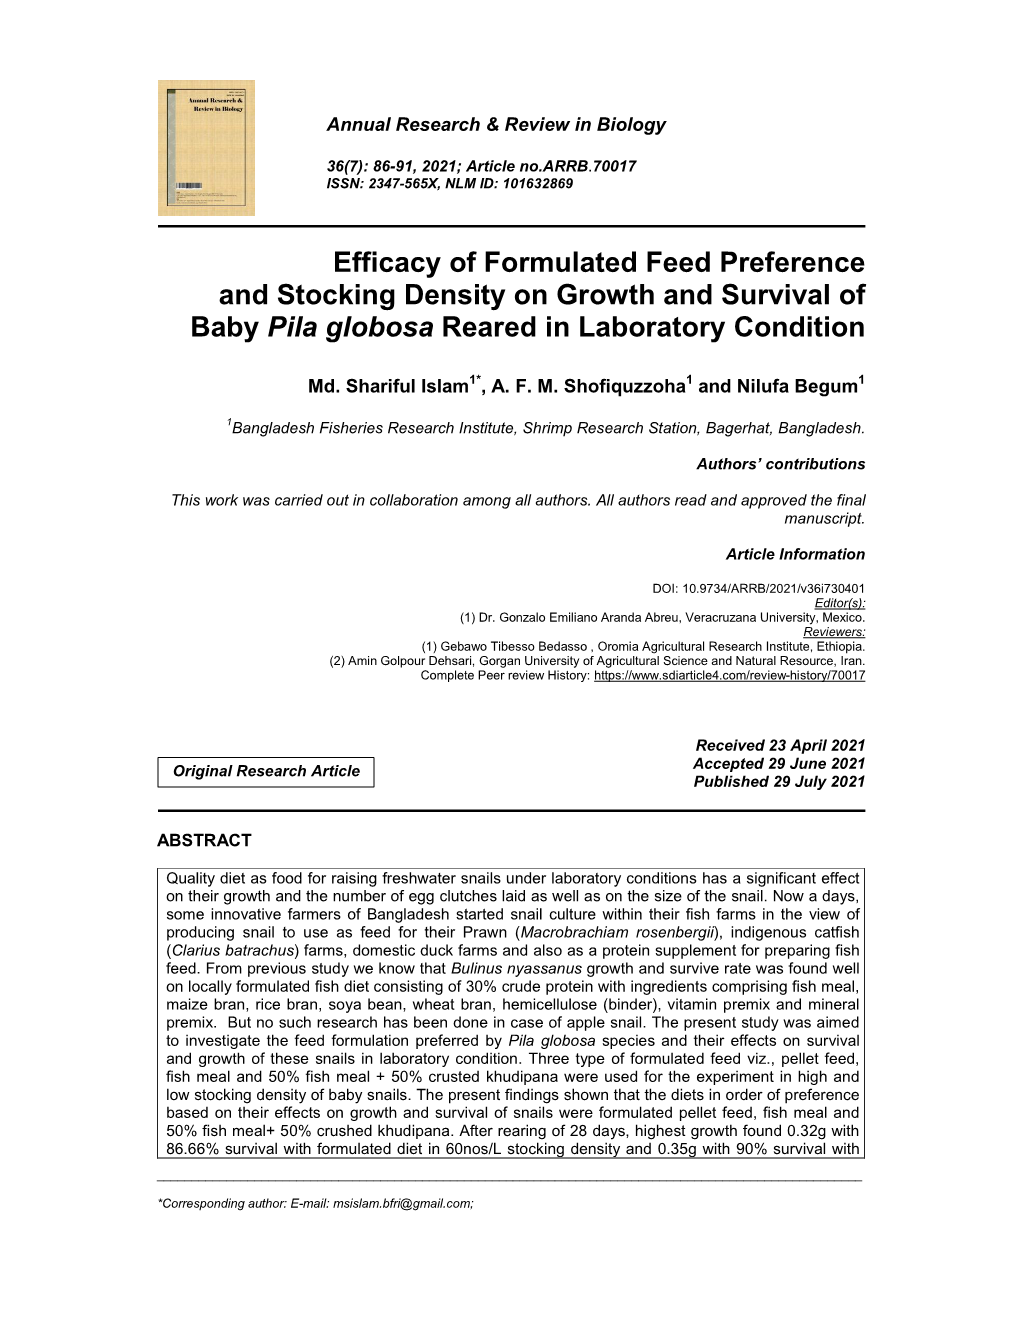 Efficacy of Formulated Feed Preference and Stocking Density on Growth and Survival of Baby Pila Globosa Reared in Laboratory Condition